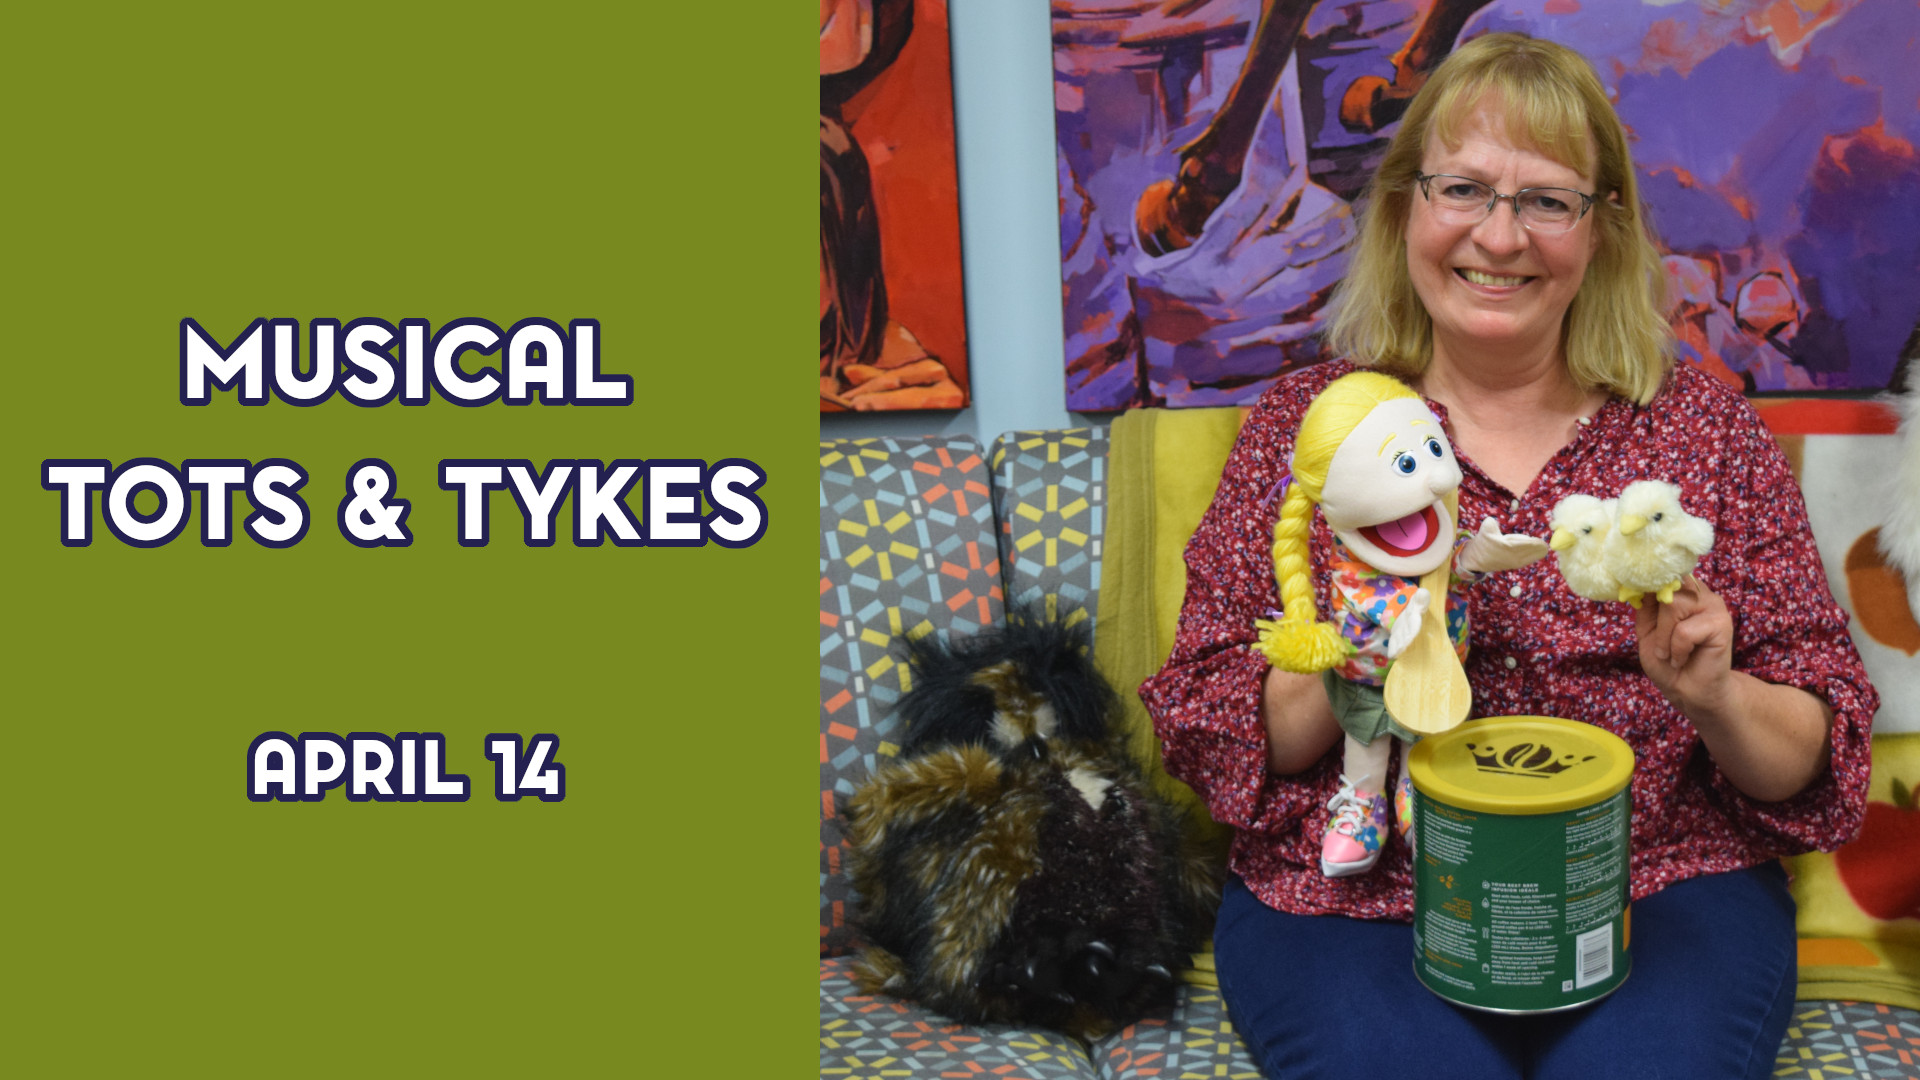 A woman holds a puppet next to the text "Musical Tots & Tykes April 14"